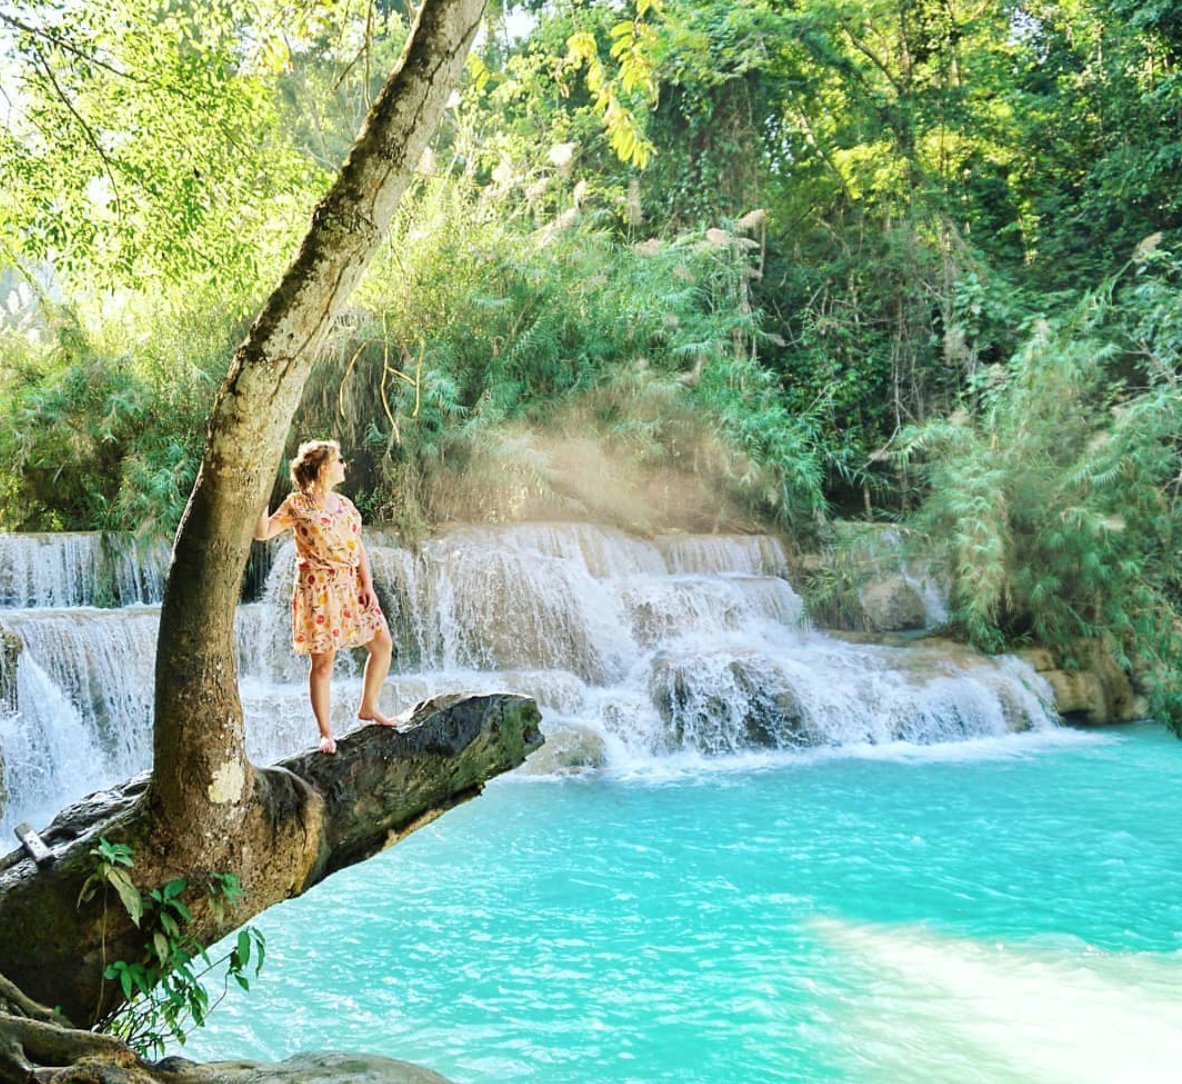 The 7 Most Instagrammable Spots In Laos – Big 7 Travel